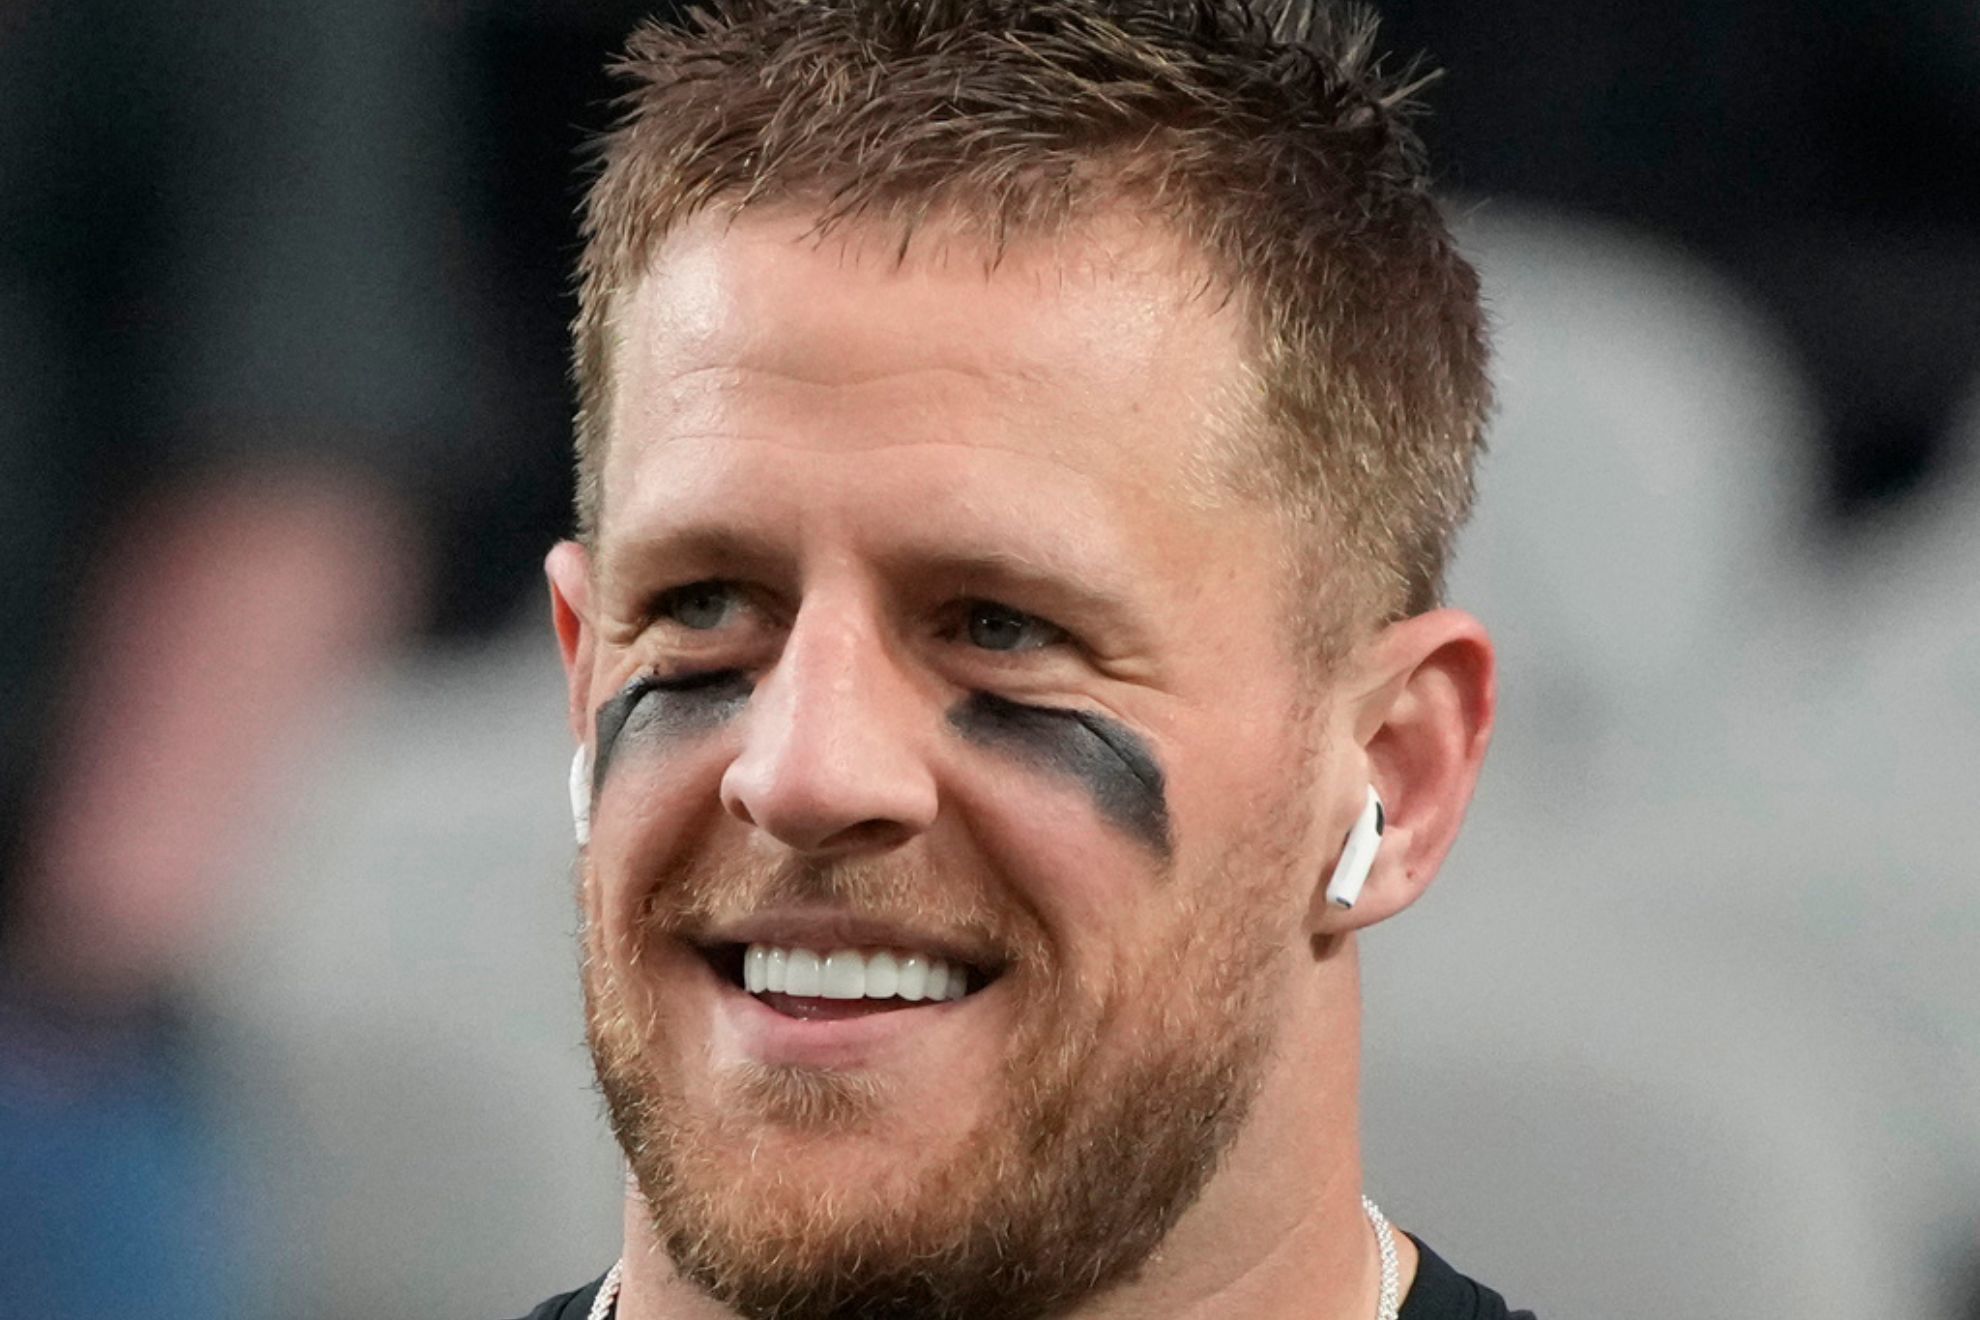 J.J. Watt has signed a multi-year deal with CBS Sports to serve as a studio analyst.